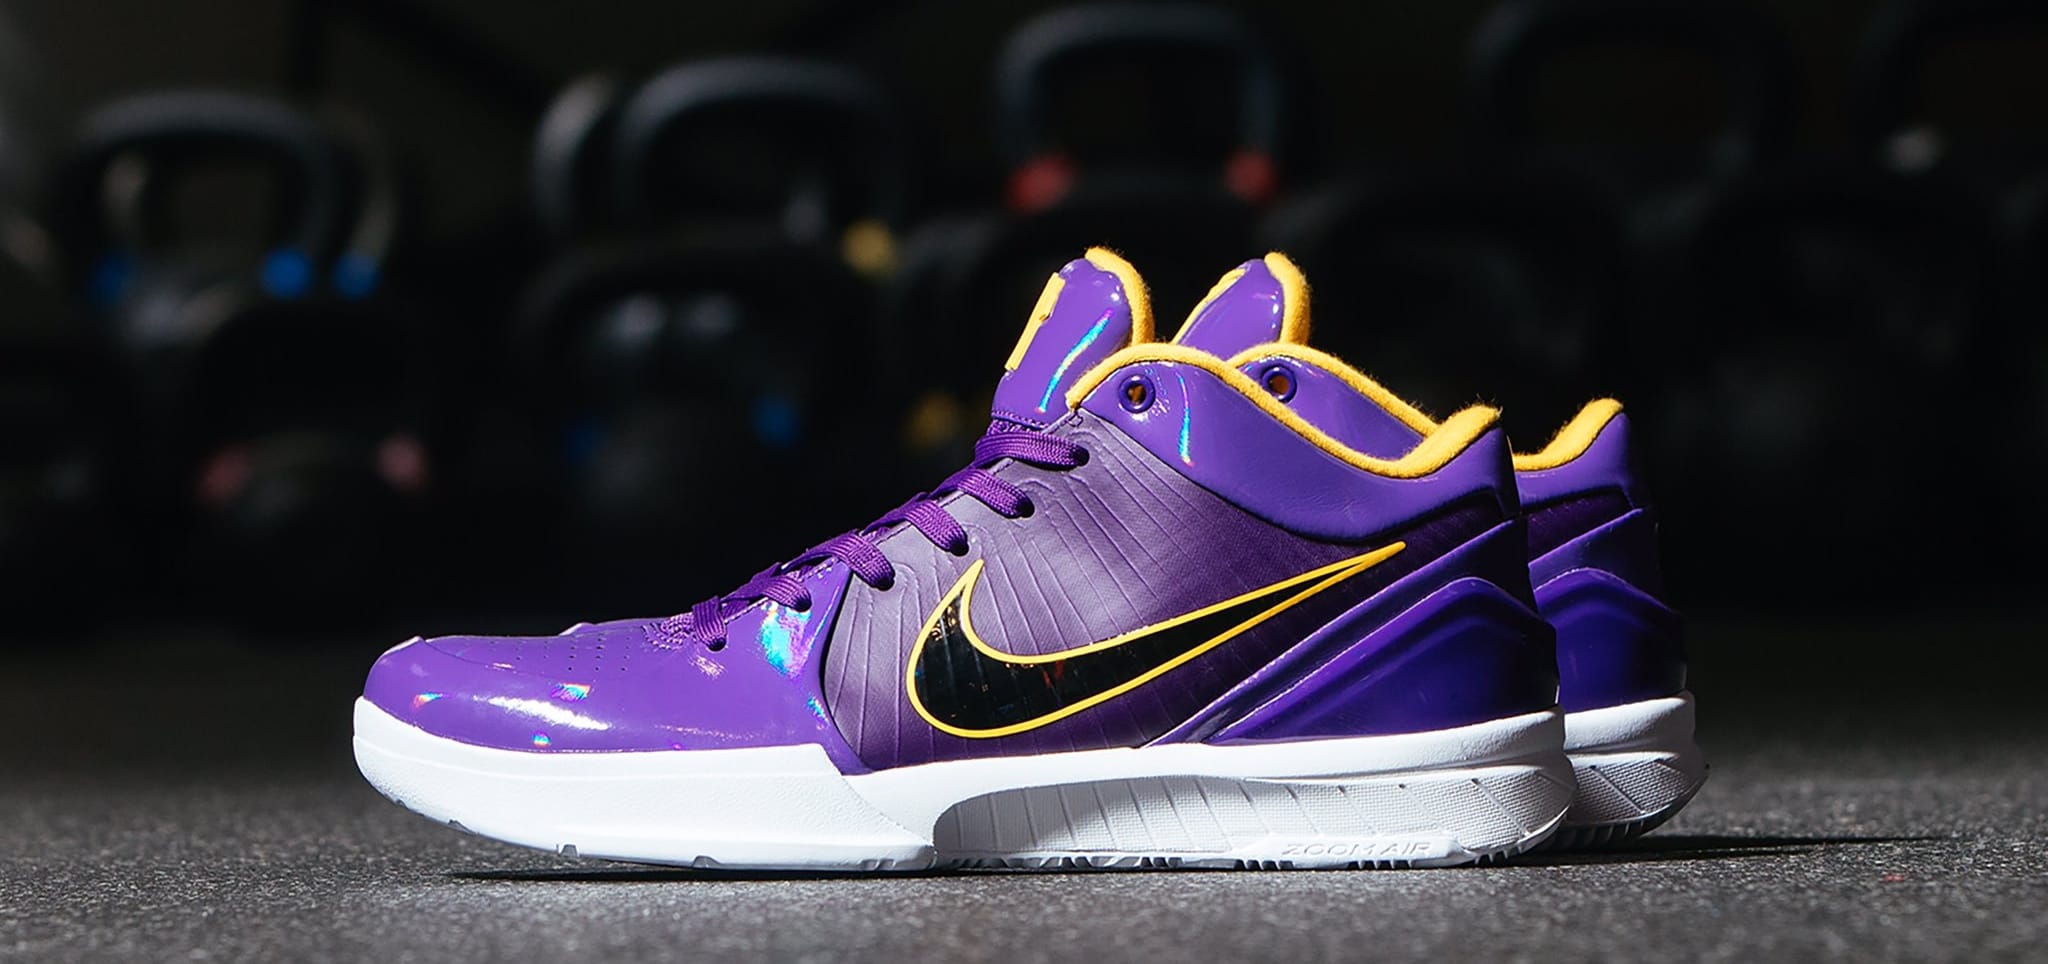 Undefeated x Nike Kobe 4 Protro 'Court Purple' (Lateral)